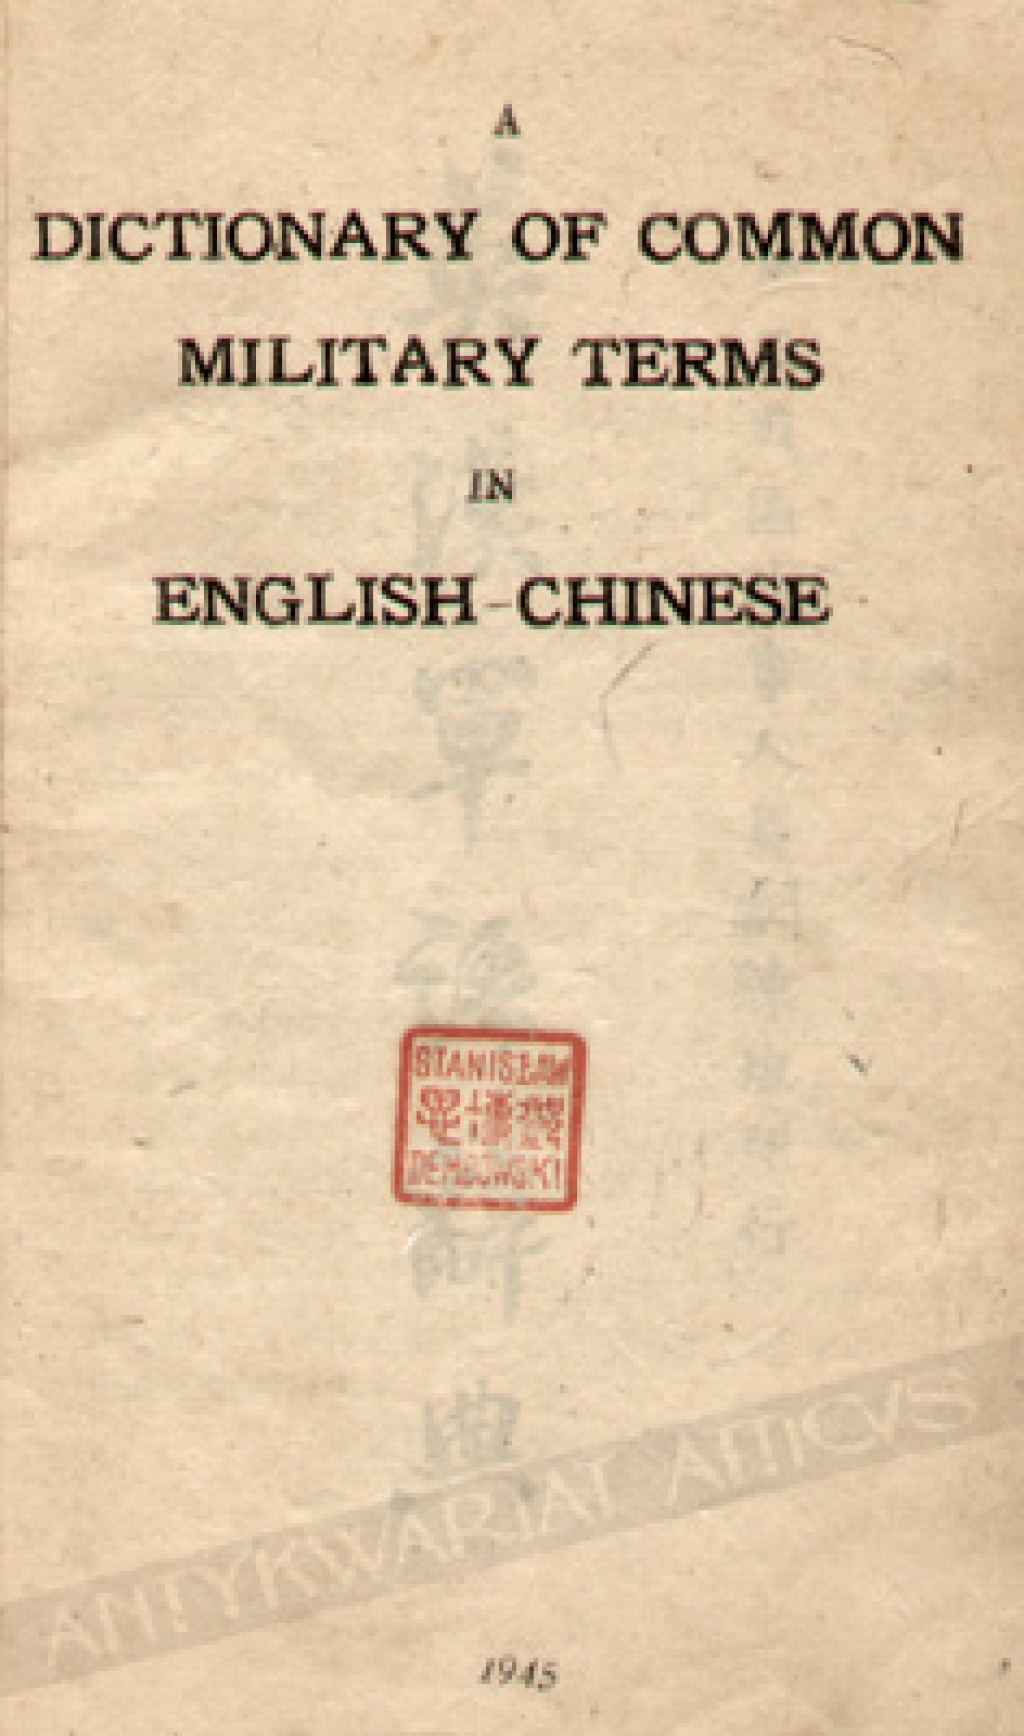 Dictionary of Common Military Terms in English-Chinese